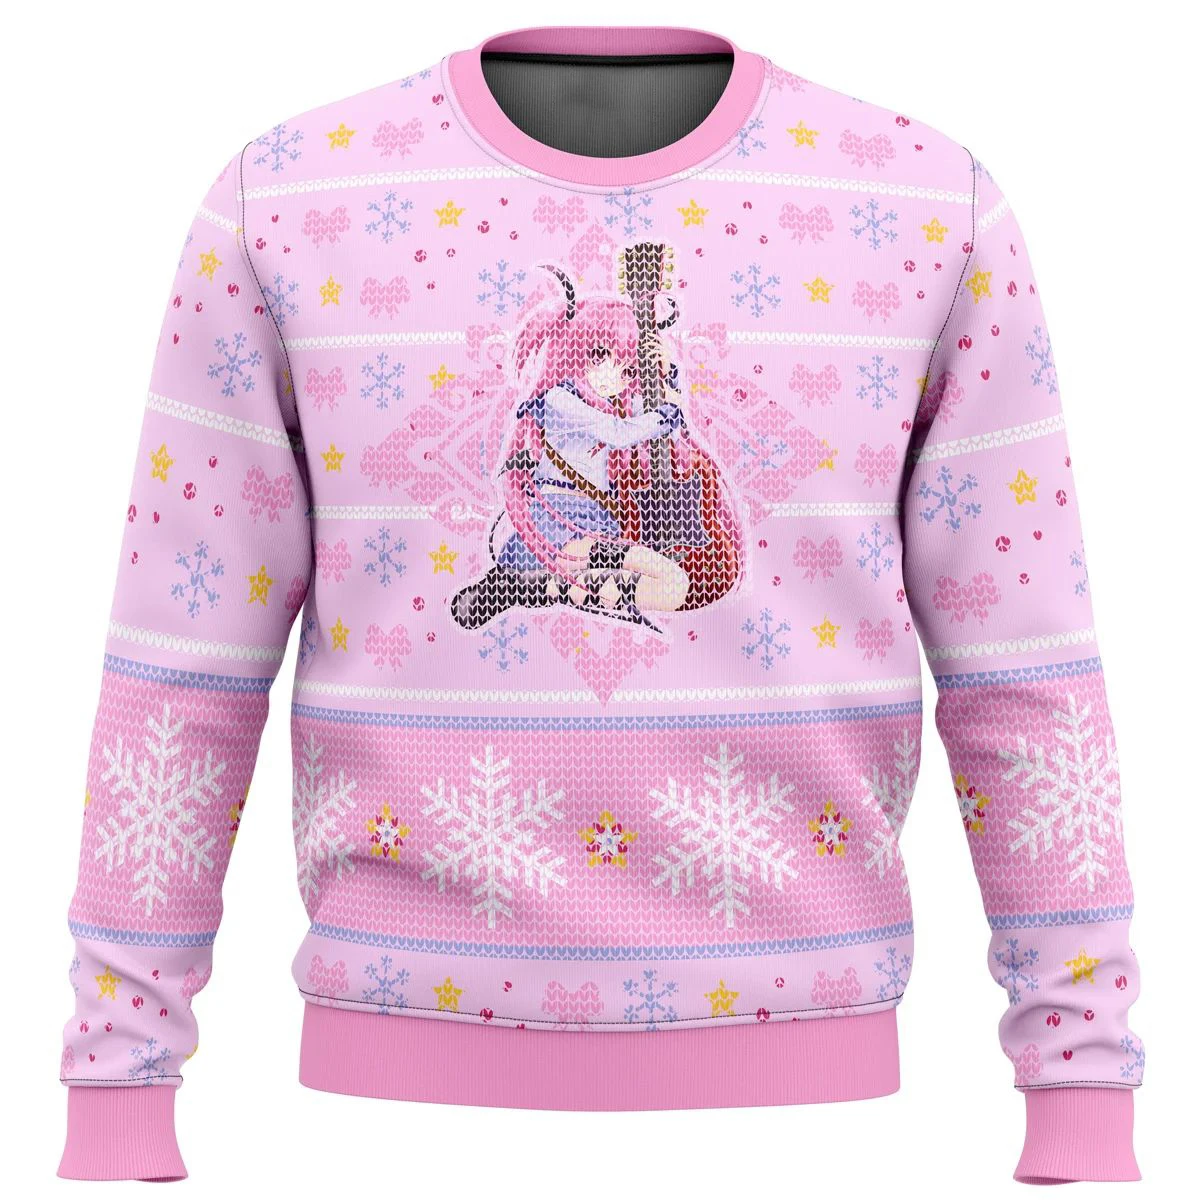 

Angel Beats Yui Loves Guitar Ugly Christmas Sweater Christmas Sweater gift Santa Claus pullover men 3D Sweatshirt and top autumn